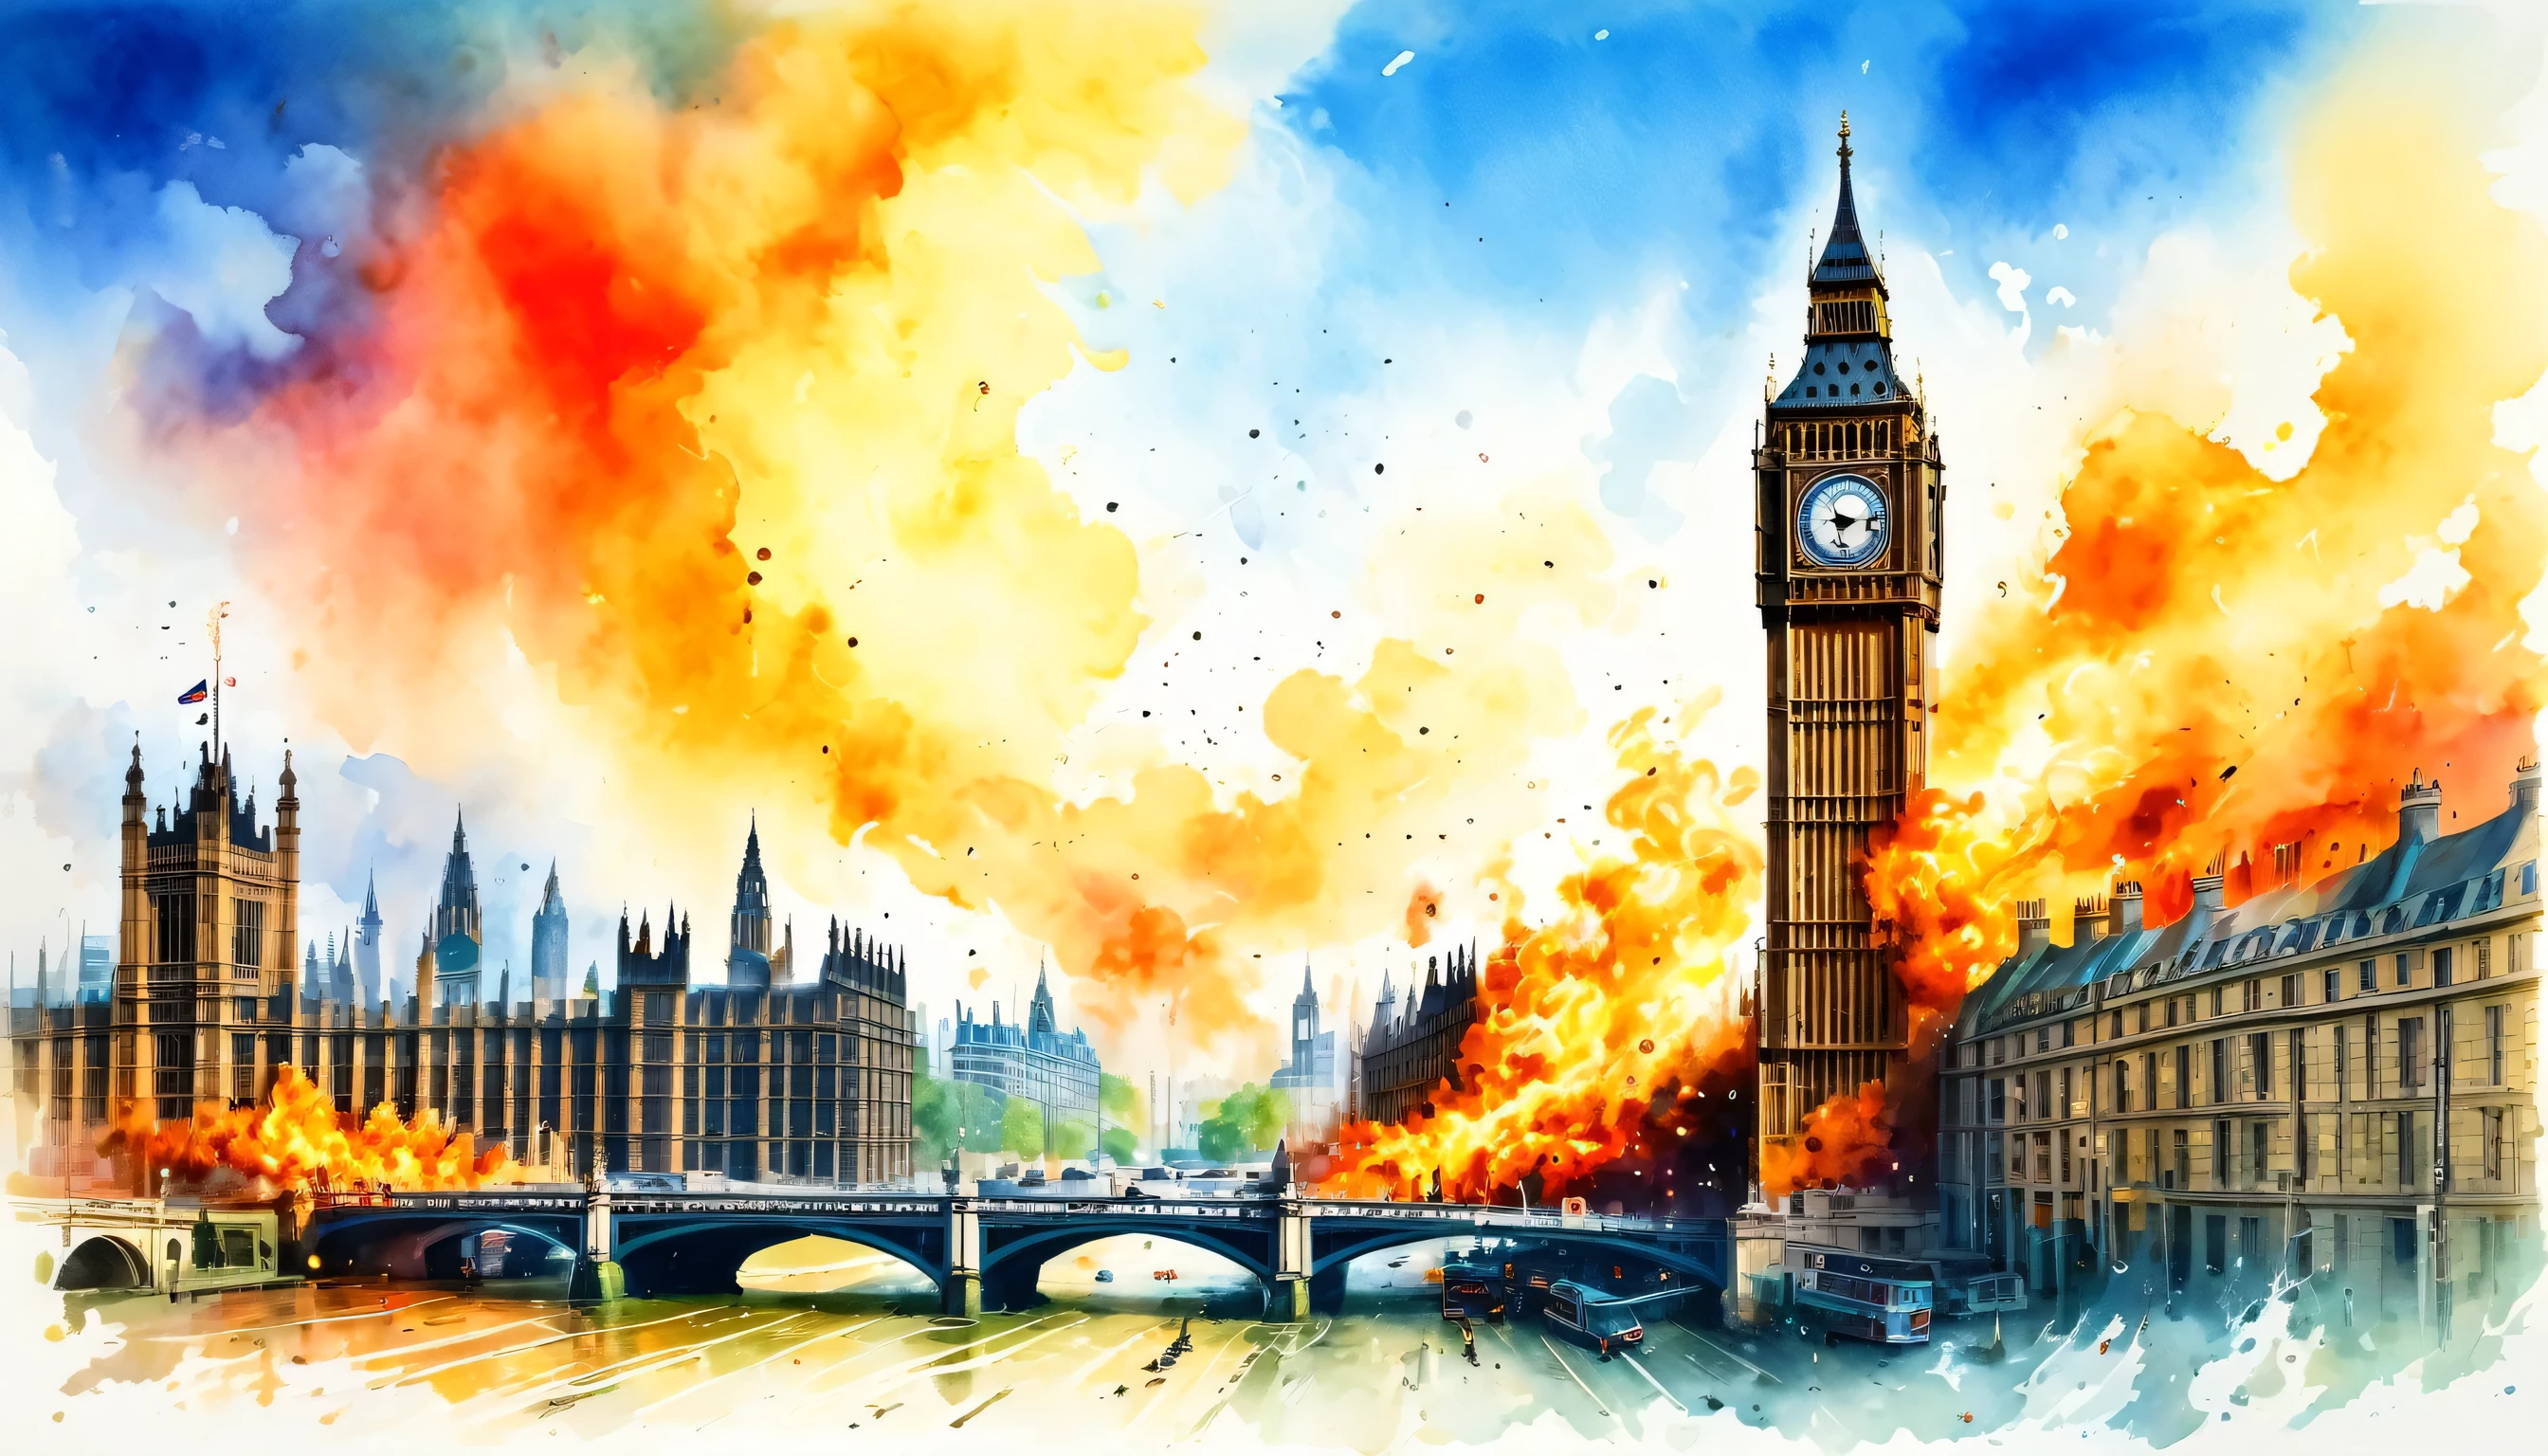 Post Apocalyptic scene, London, Big Ben clock tower on fire, buildings engulfed in flames, emitting smoke, sky filled with clouds, smoke, scenery, fire, ruins, cityscape, explosion, destruction, modern art, painting, drawing, watercolor, psychedelic colors